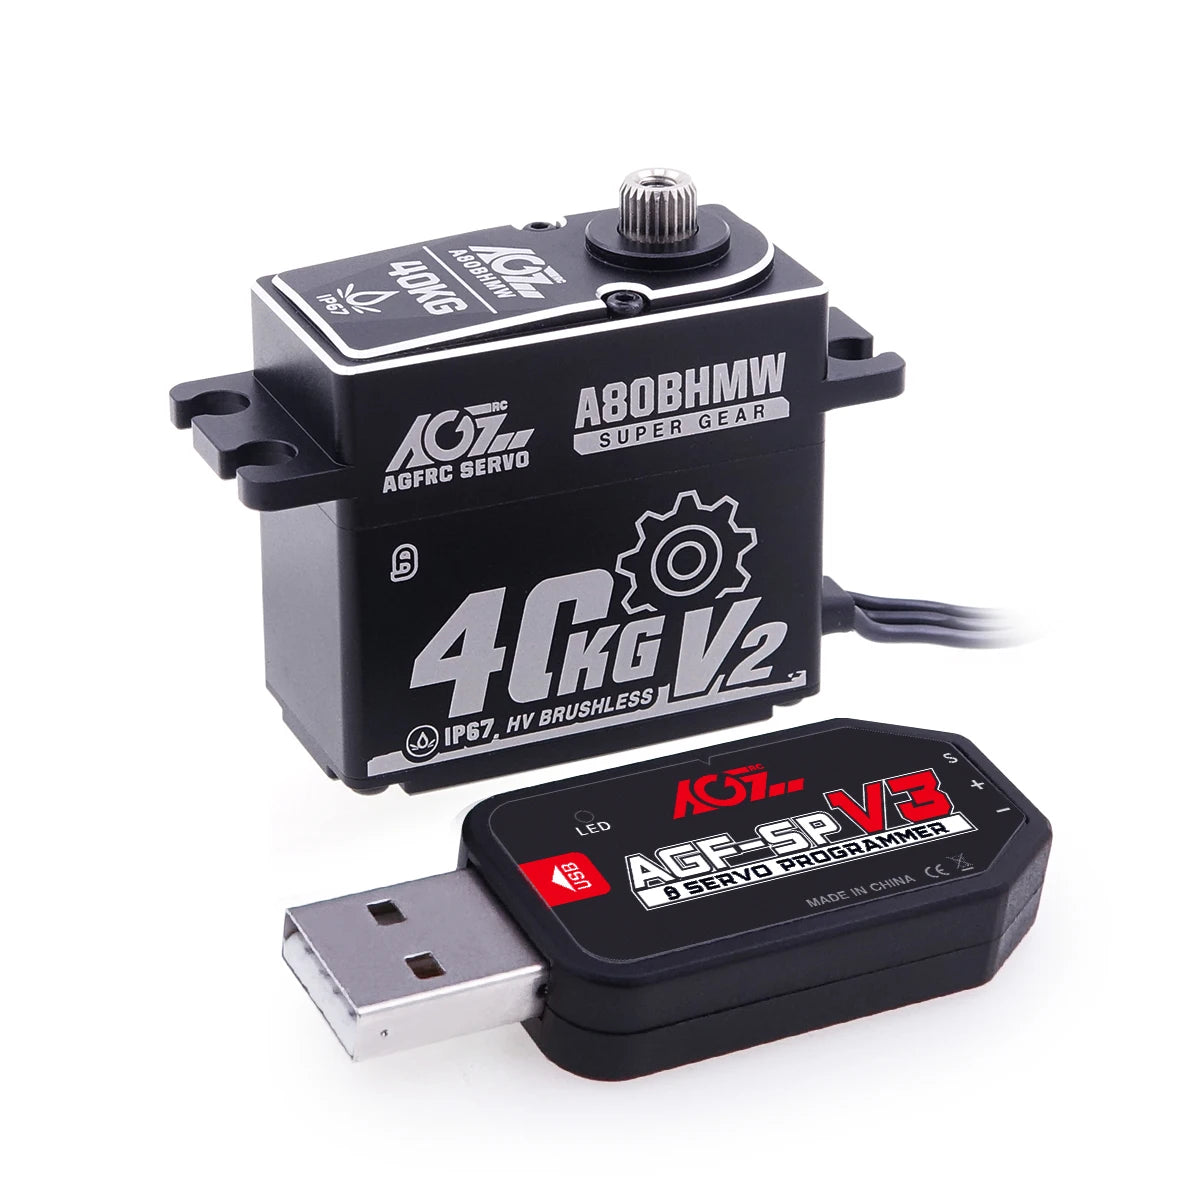 AGFRC A80BHMW V2 - Steel Gears 40KG Programmable Waterproof BLS RC Steering Servo For 1/10 Scale Car Crawler Buggy Truck Off-Road